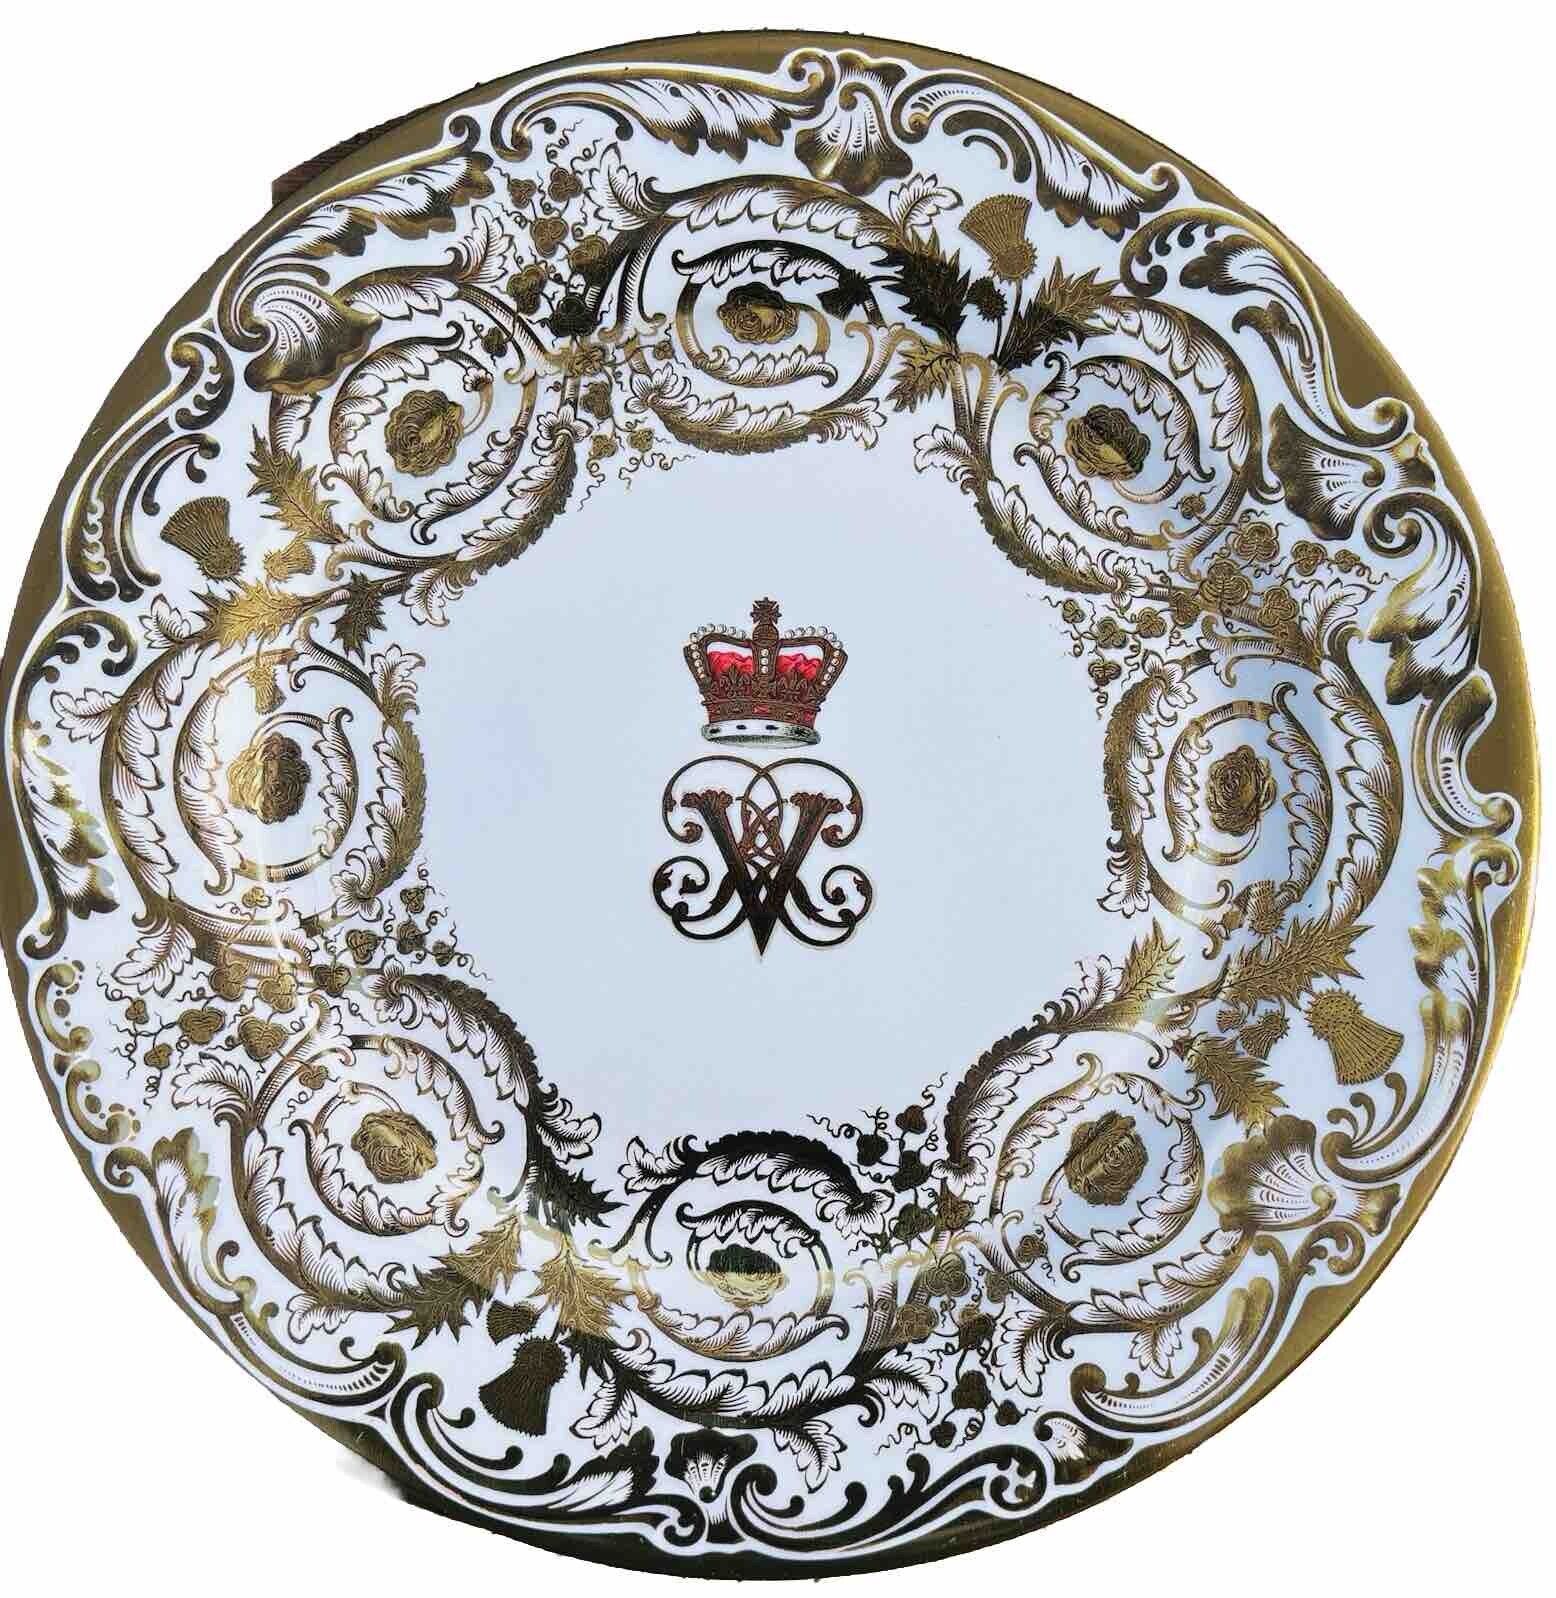 👑ROYAL COLLECTION ENGLAND COMMEMORATIVE TIN PLATE (VICTORIA & ALBERT PLATE)